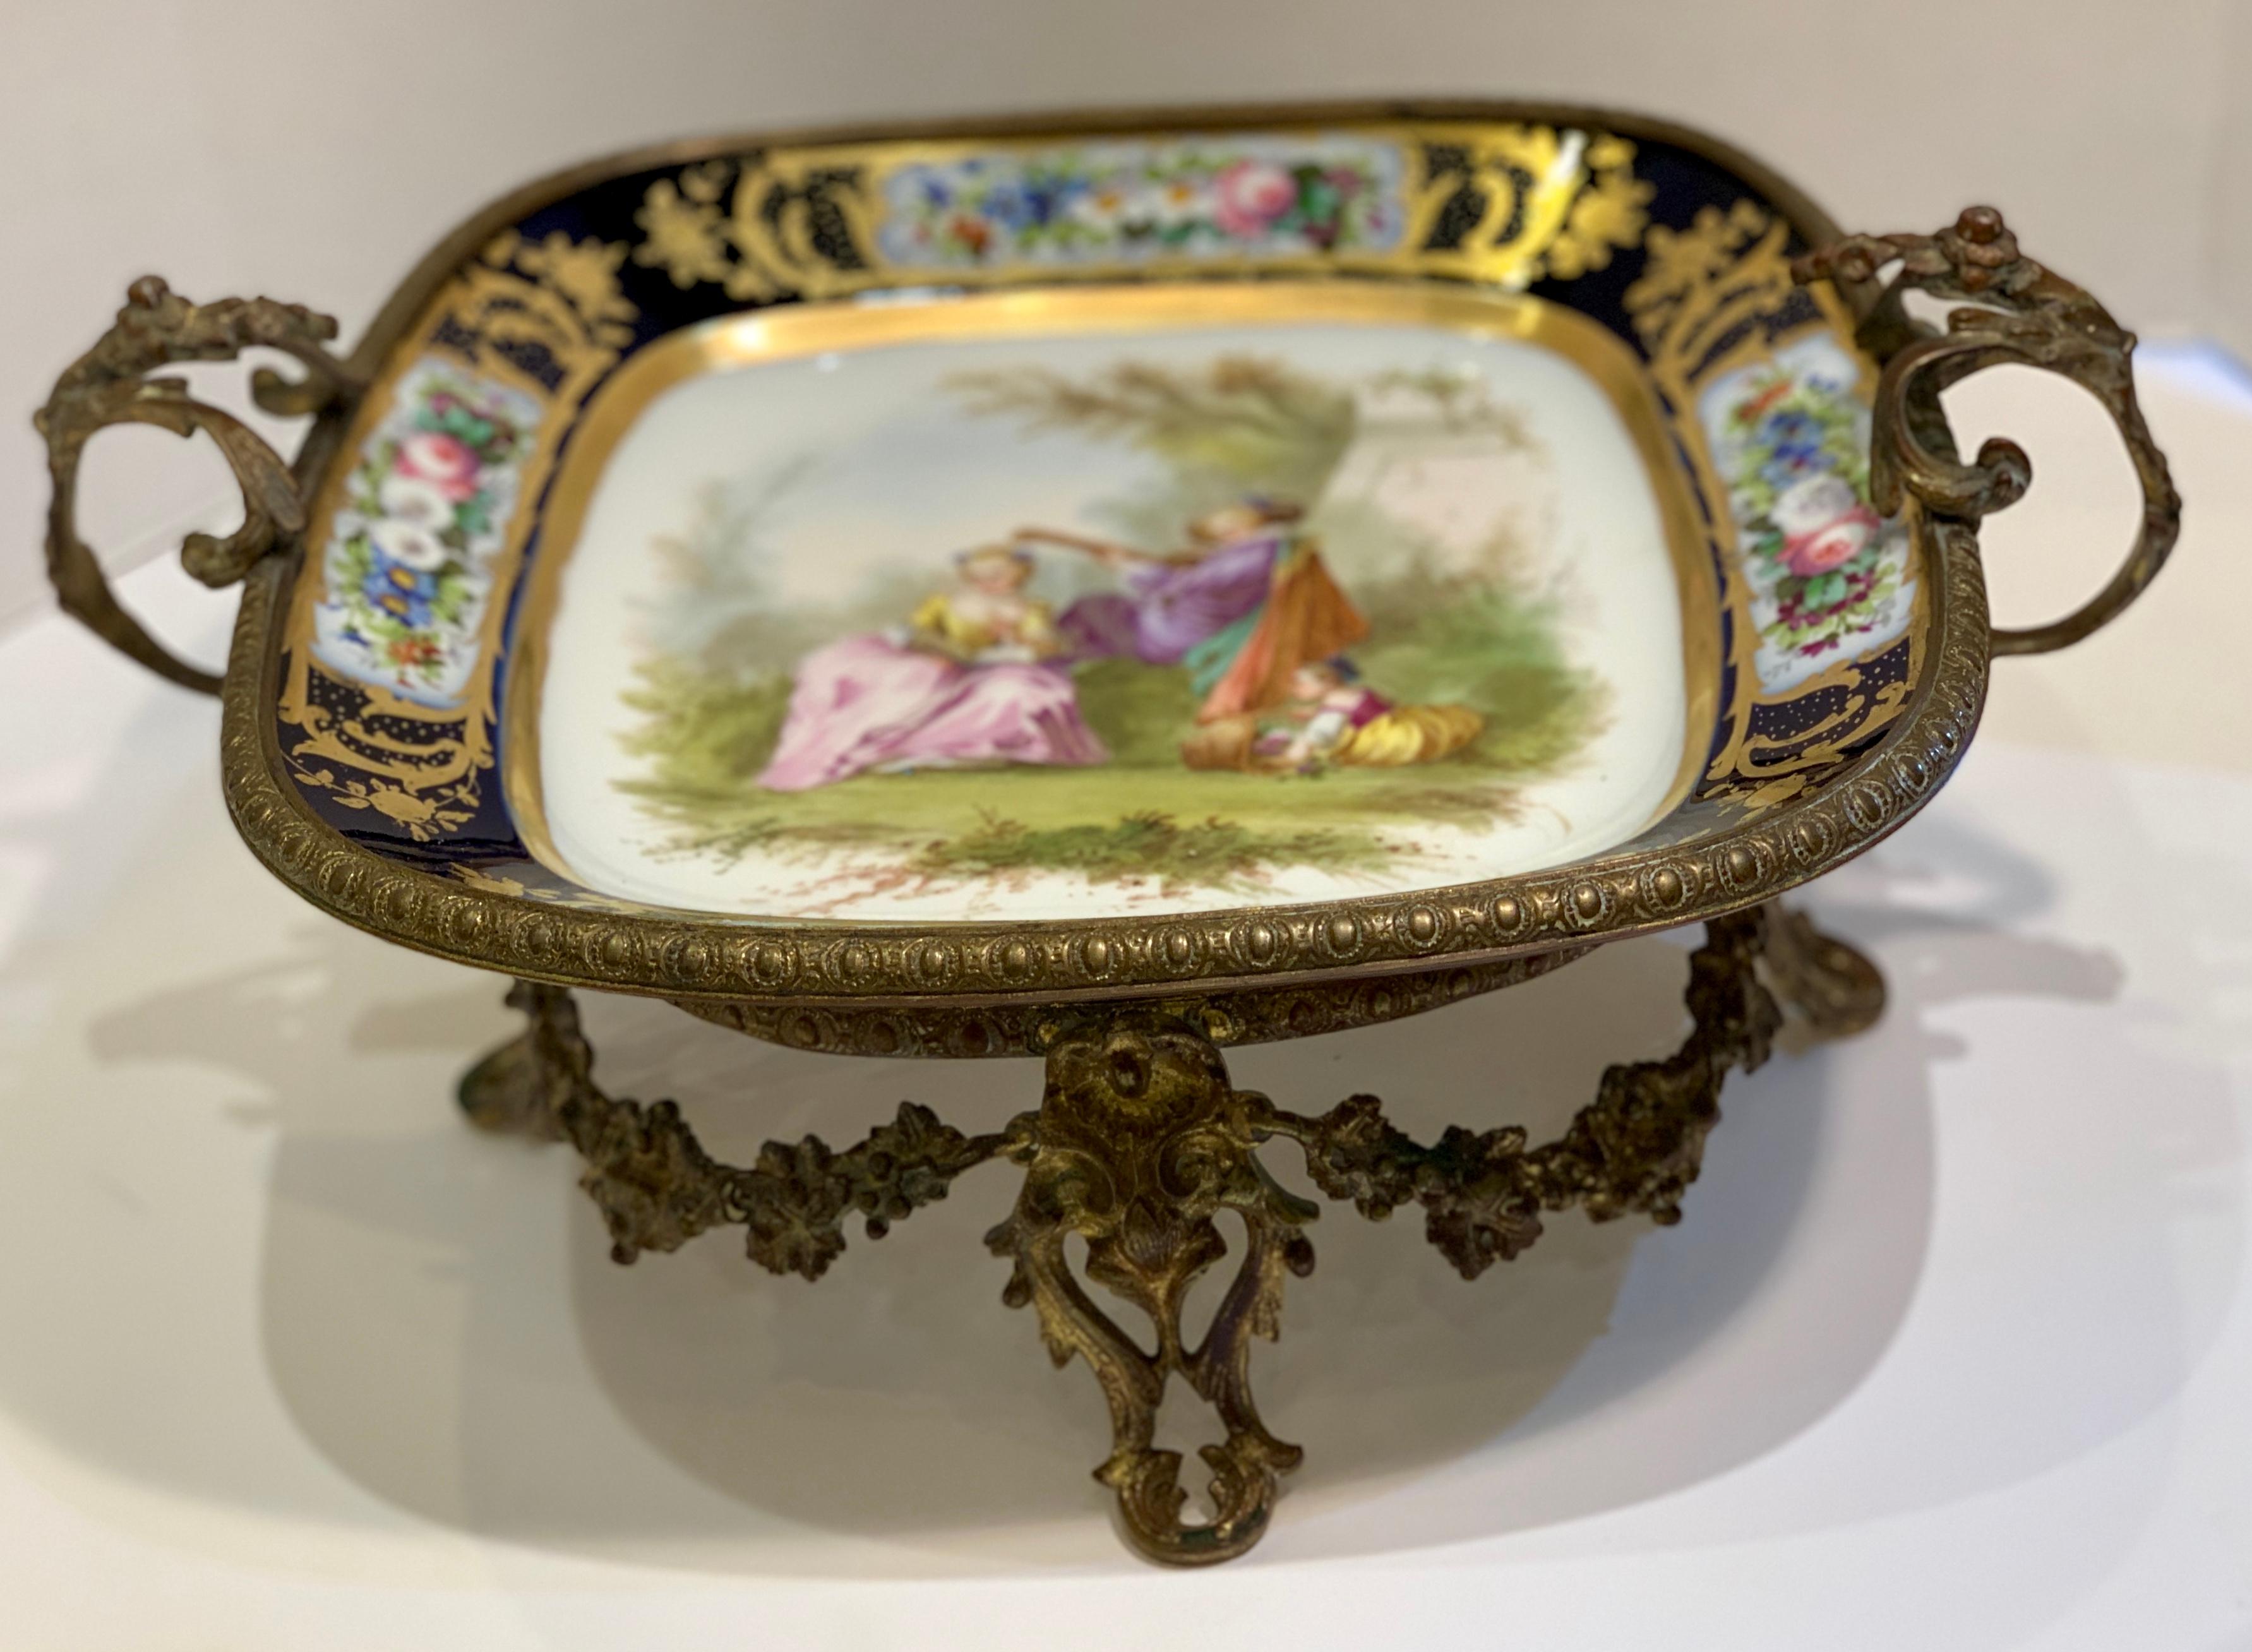 Opulent, 19th century handmade and painted square porcelain and ormolu gilt metal centerpiece features elaborately scrolling floral split handles, and a grapevine wreathed frame with egg and dart edges on cabriole legs. An idyllic pastoral scene is